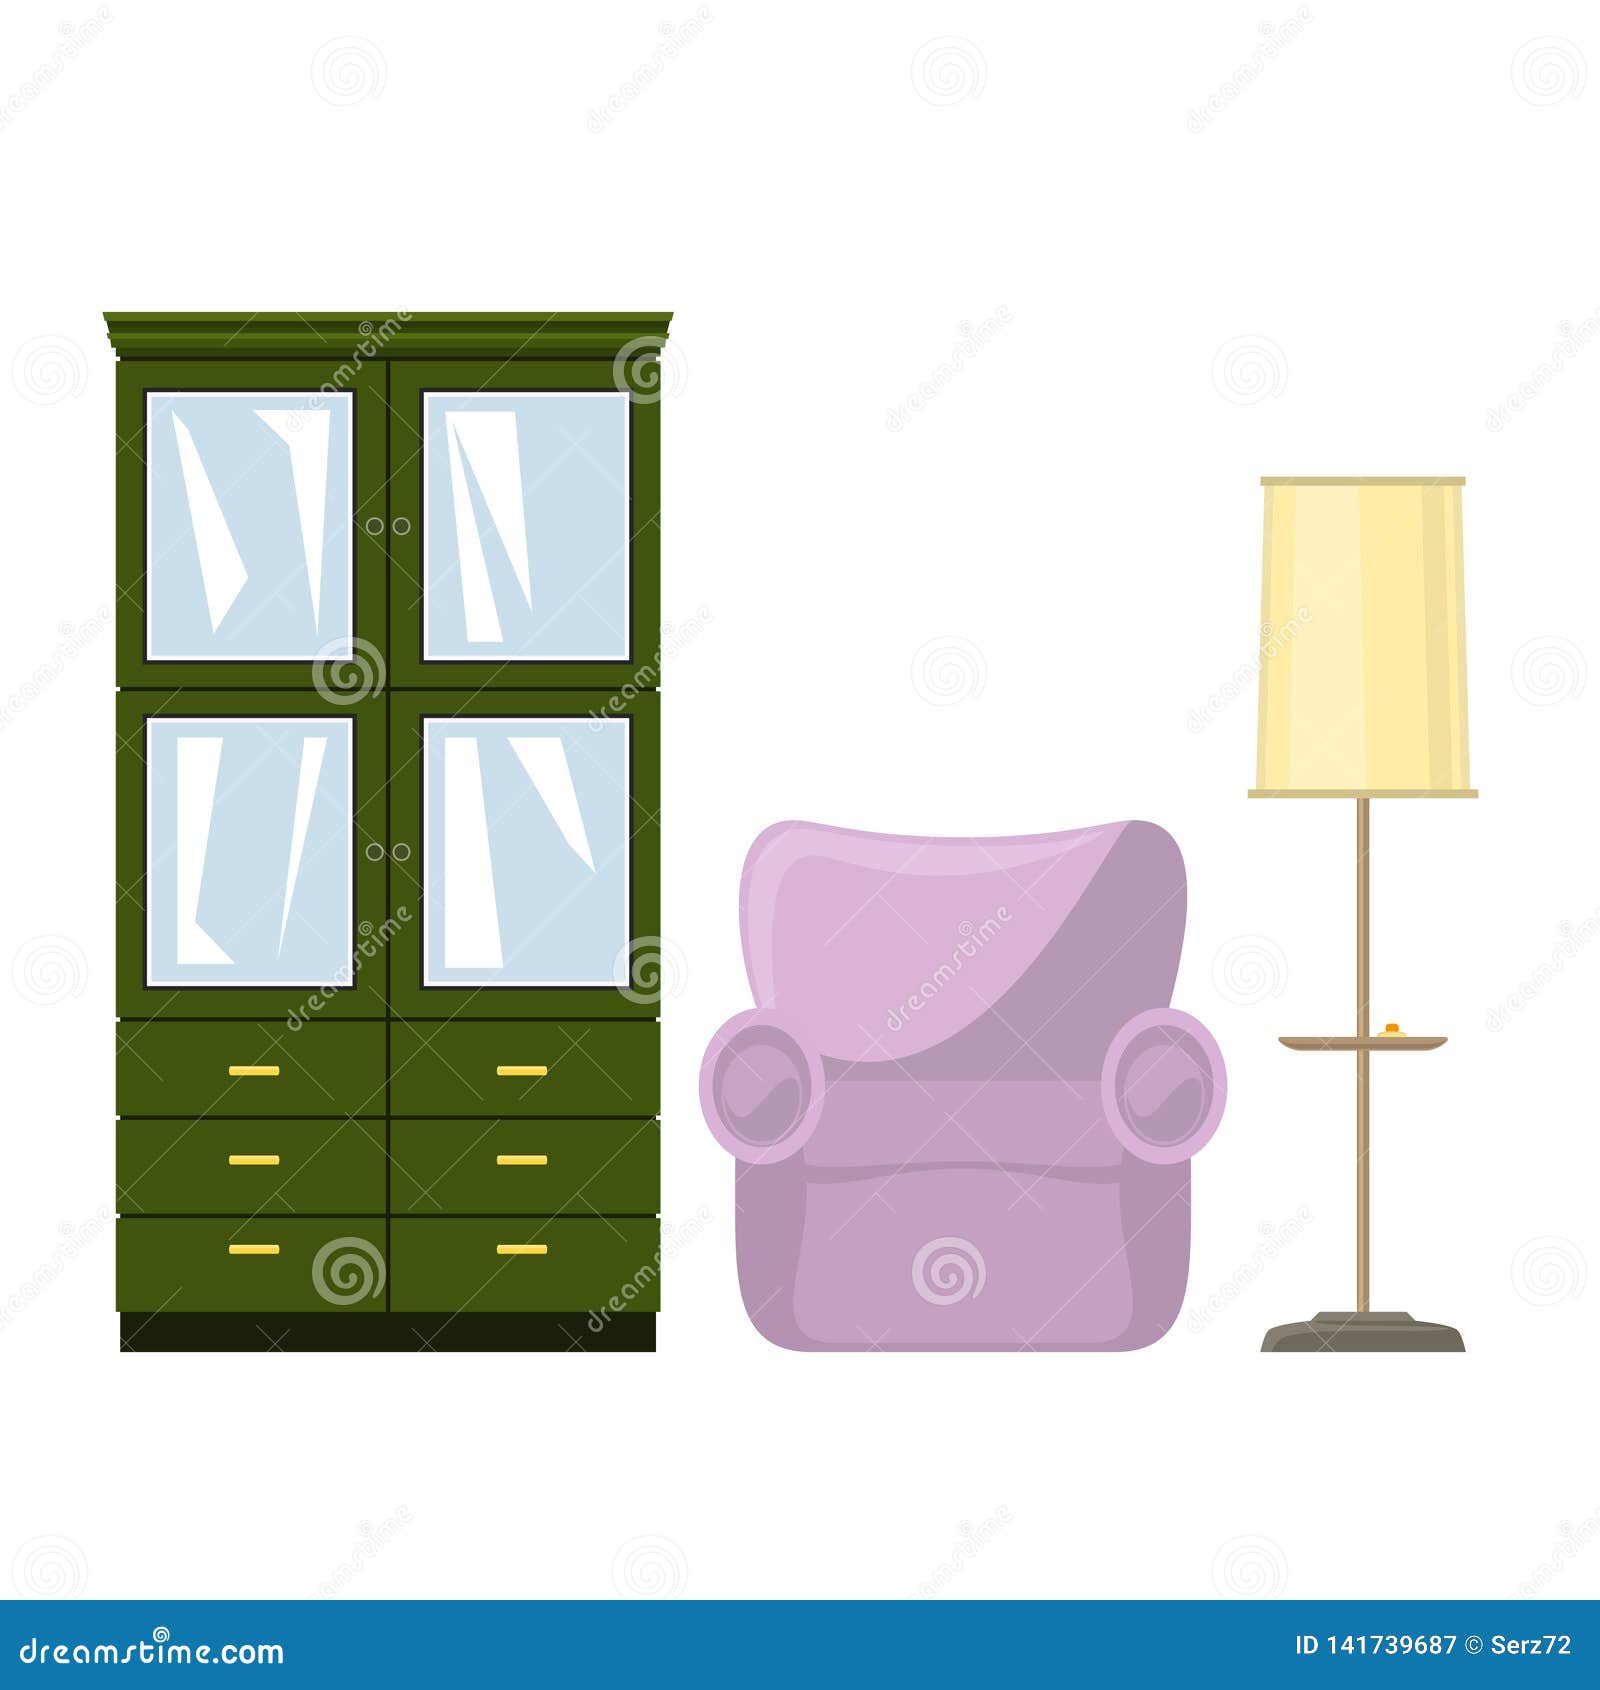 Furniture For The Living Room Stock Vector Illustration Of Floor